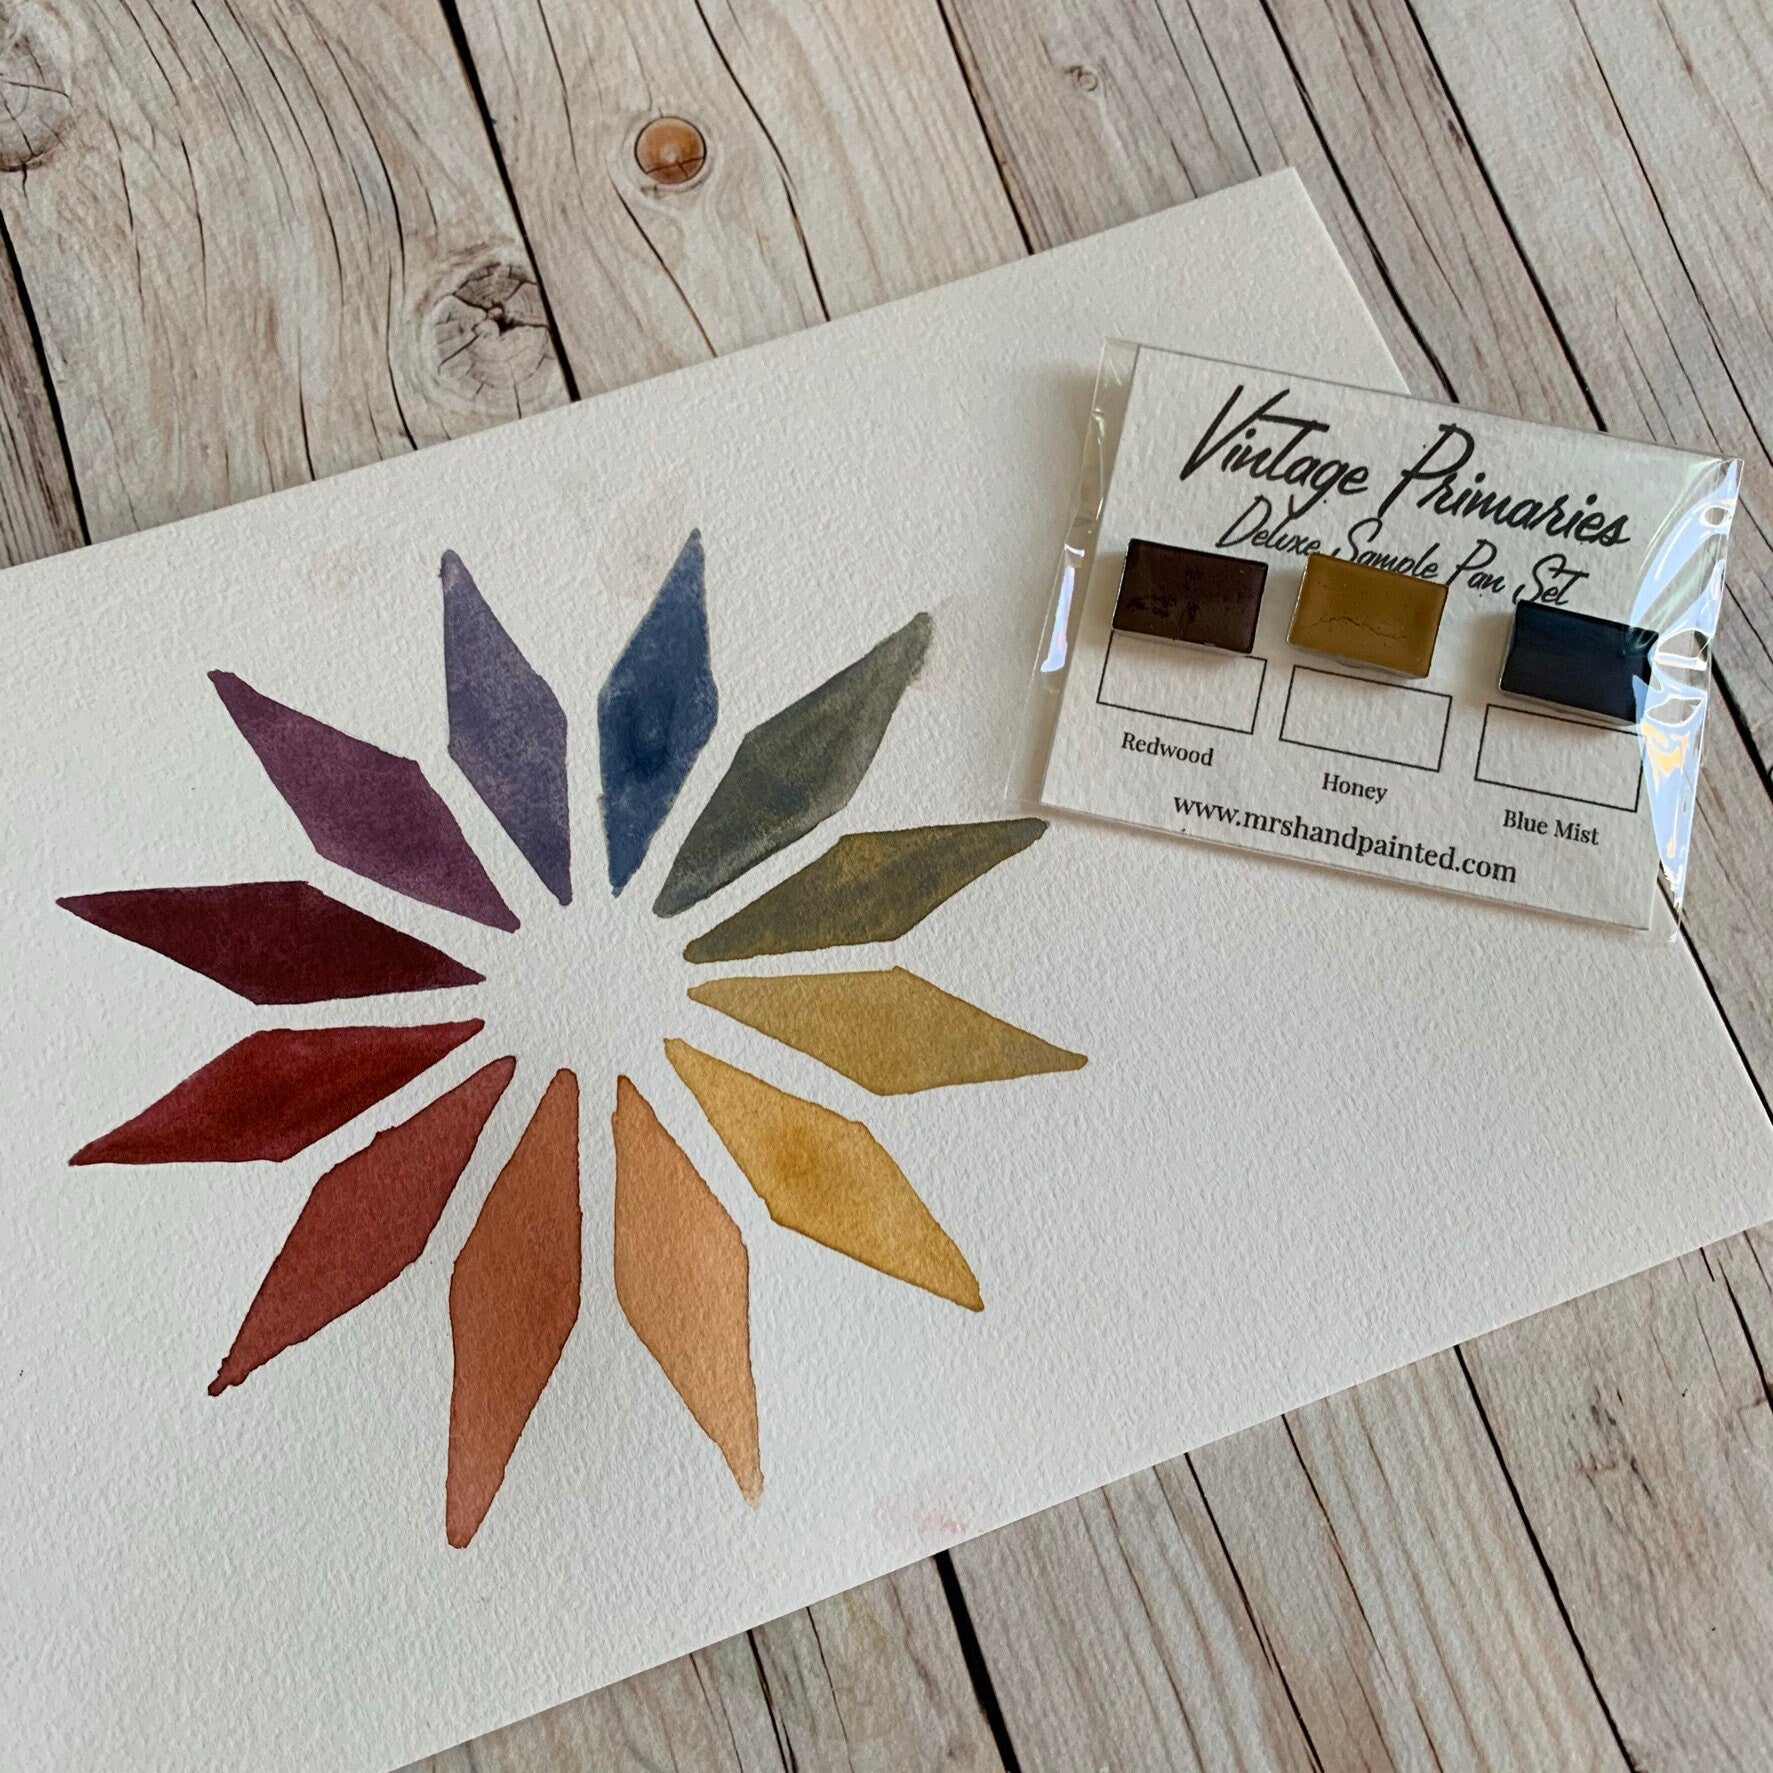 Handmade Watercolor Paints - VINTAGE PRIMARIES - Artisan Paint Palette, Set of 3 Primary Colors, Red, Yellow and Blue, Matte Watercolor